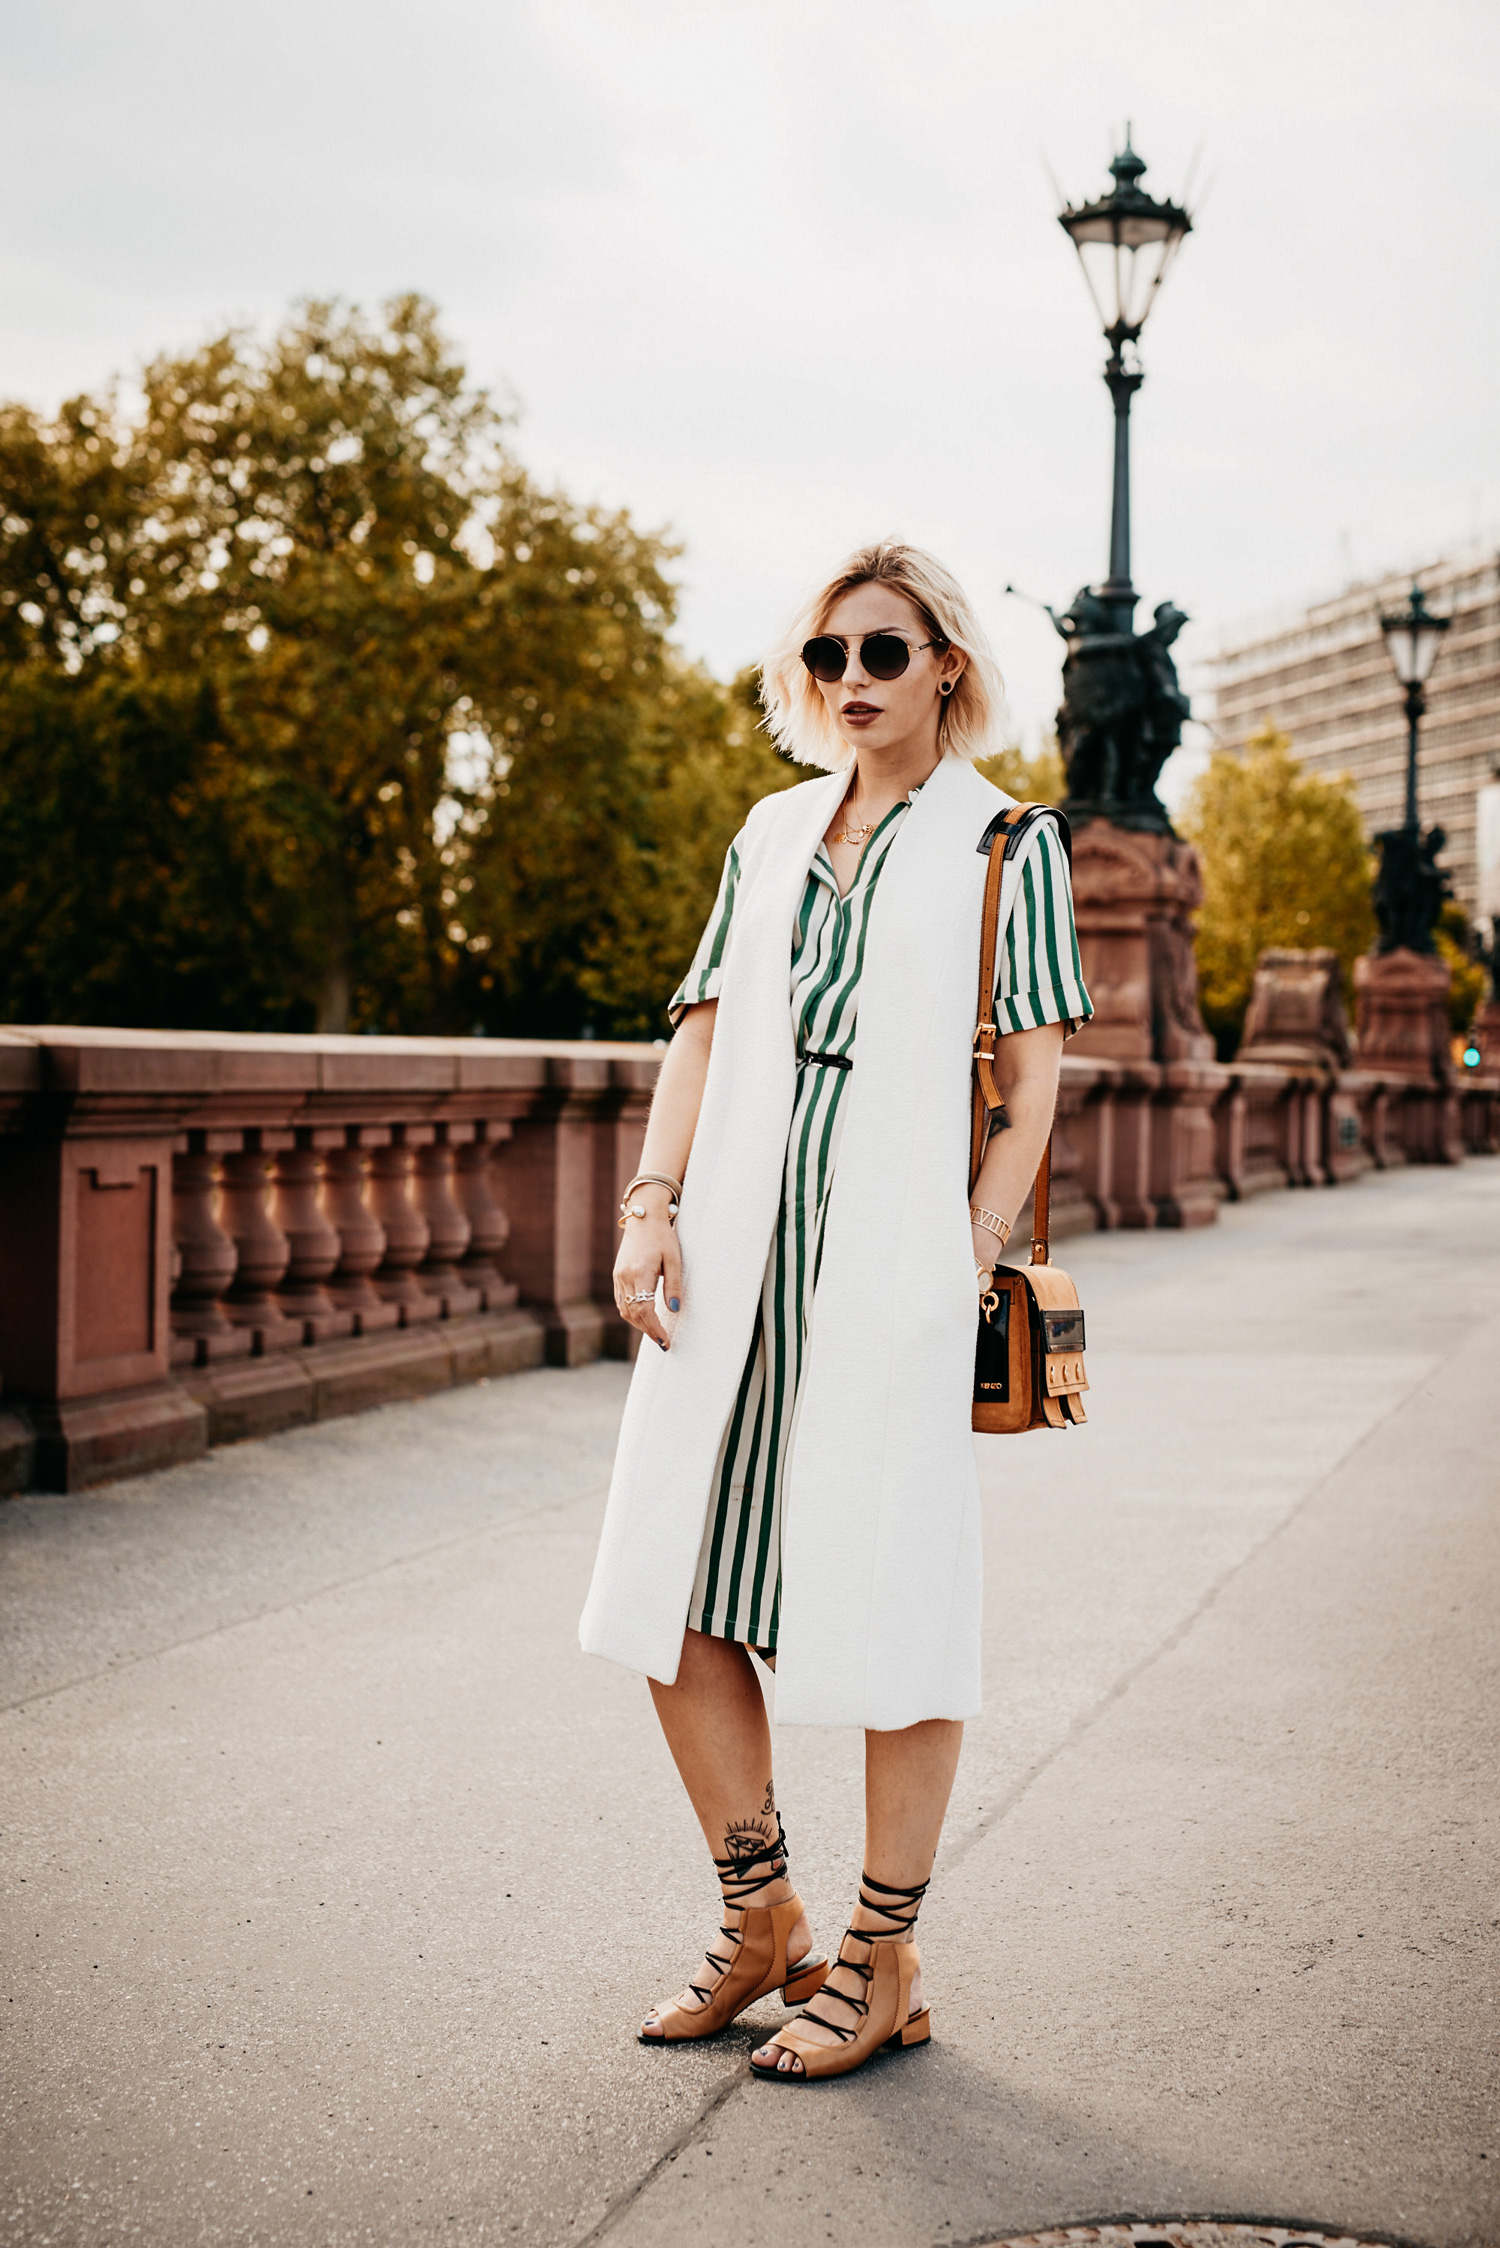 Amazon Fashion campaign | Look like you | #saysomethingnice | long green dress and a long white vest